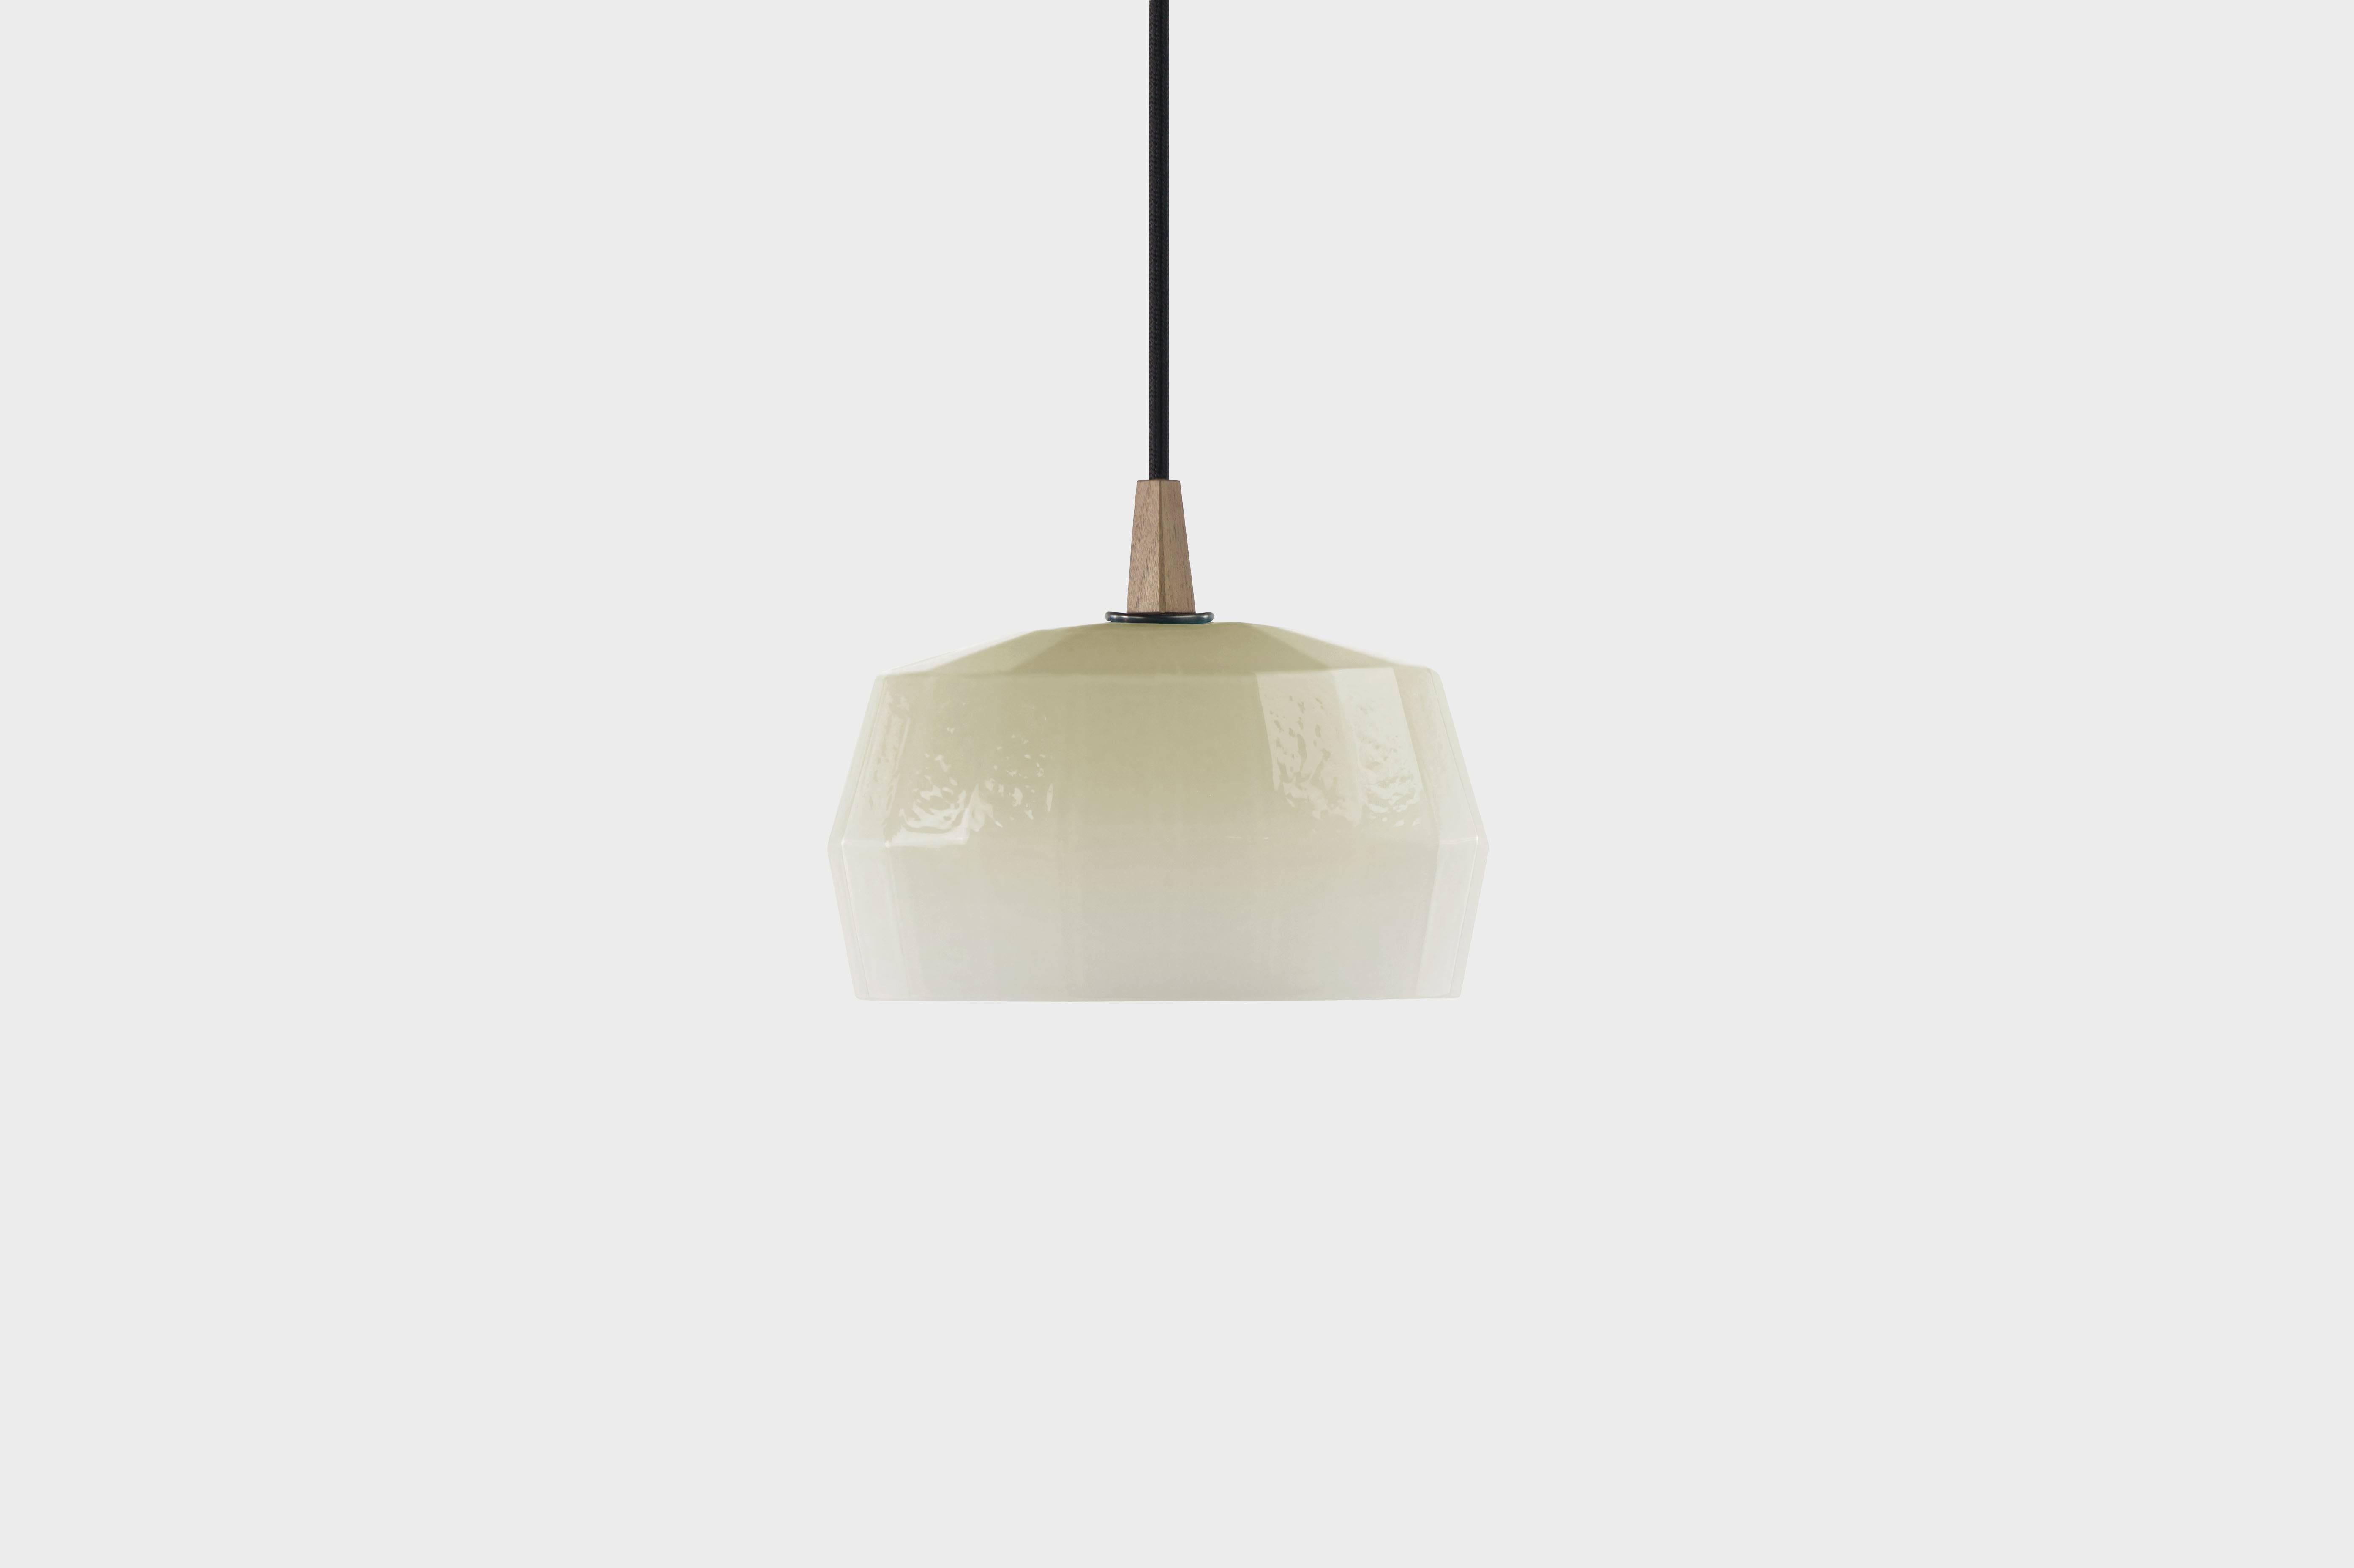 ZEP - 7.5”H x 9”L x 4.5”W    Available in 7 colors Cream, Caramel, Lagoon, Ruby, Sky (shown) , Slate and Tourmaline

The Poly Pop Pendant Collection gives geometrically ridged architectural structure to common organic forms. Drawing inspiration from